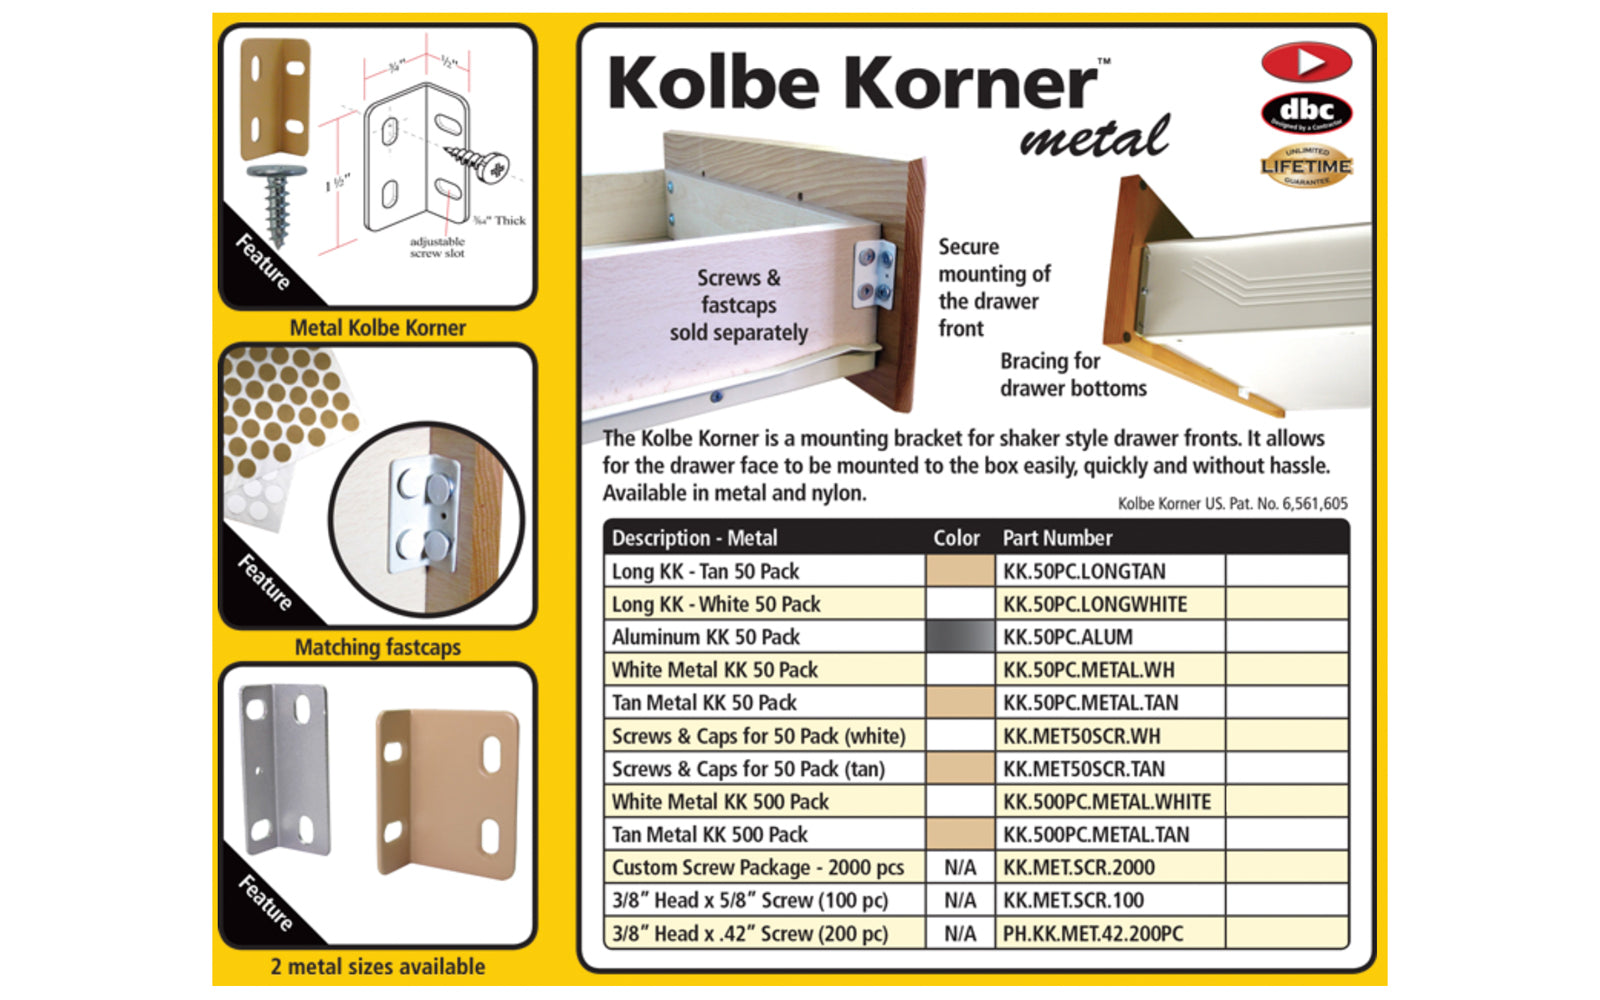 Fastcap Metal Kolbe Korner, White - 50 Pack - Mounting bracket for shaker style drawer fronts. It allows for the drawer face to be mounted to the box easily, quickly & without hassle - Model No. KK.50PC.METAL.WH